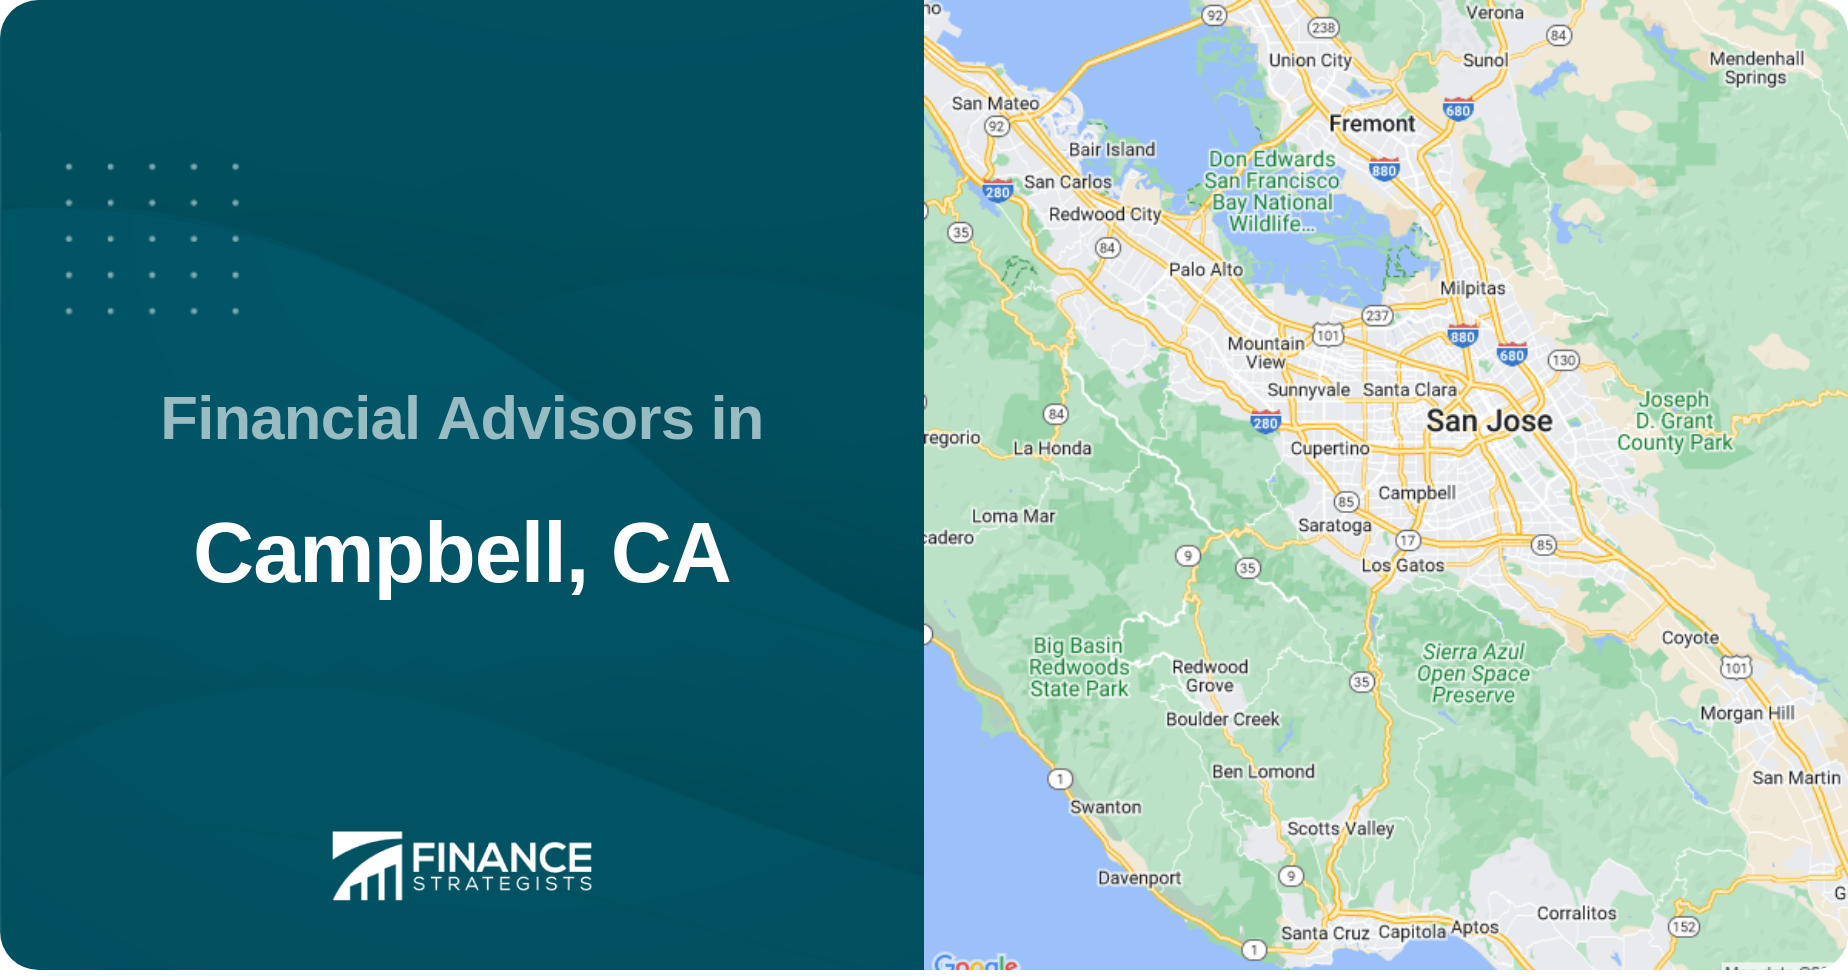 Financial Advisors in Campbell, CA